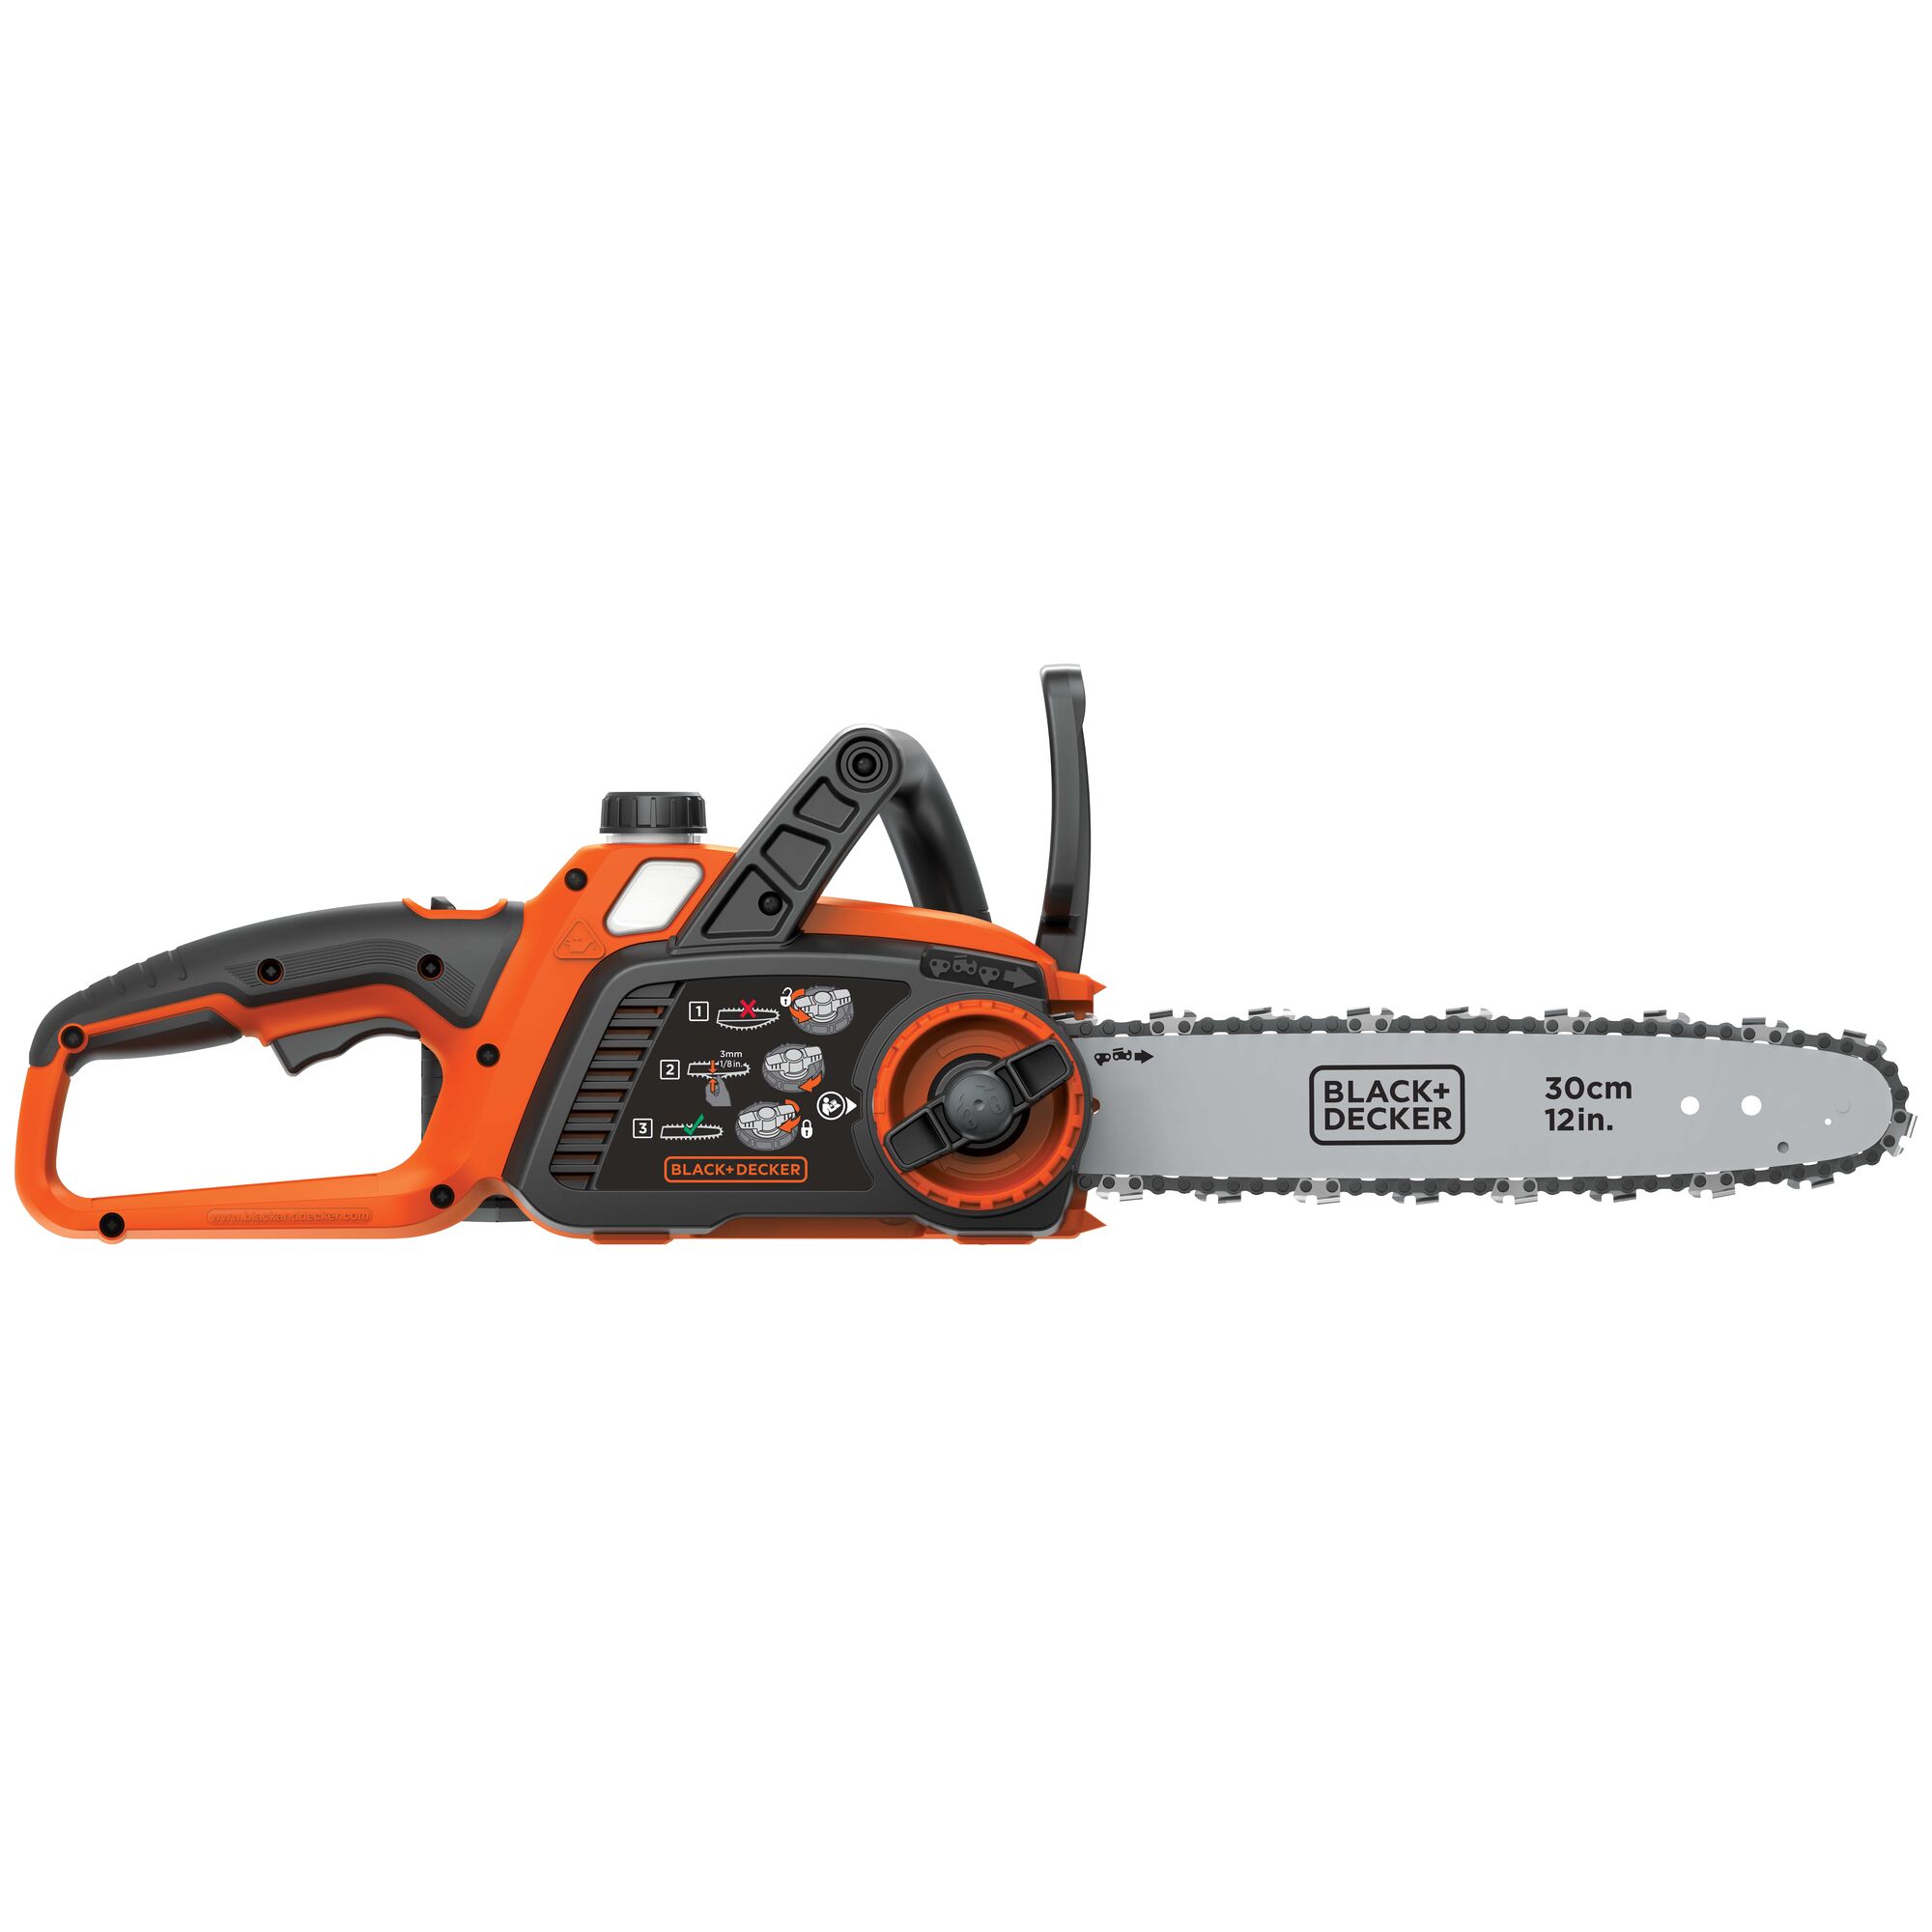 Profile of 40 volt MAX Lithium 12 inch Chainsaw.